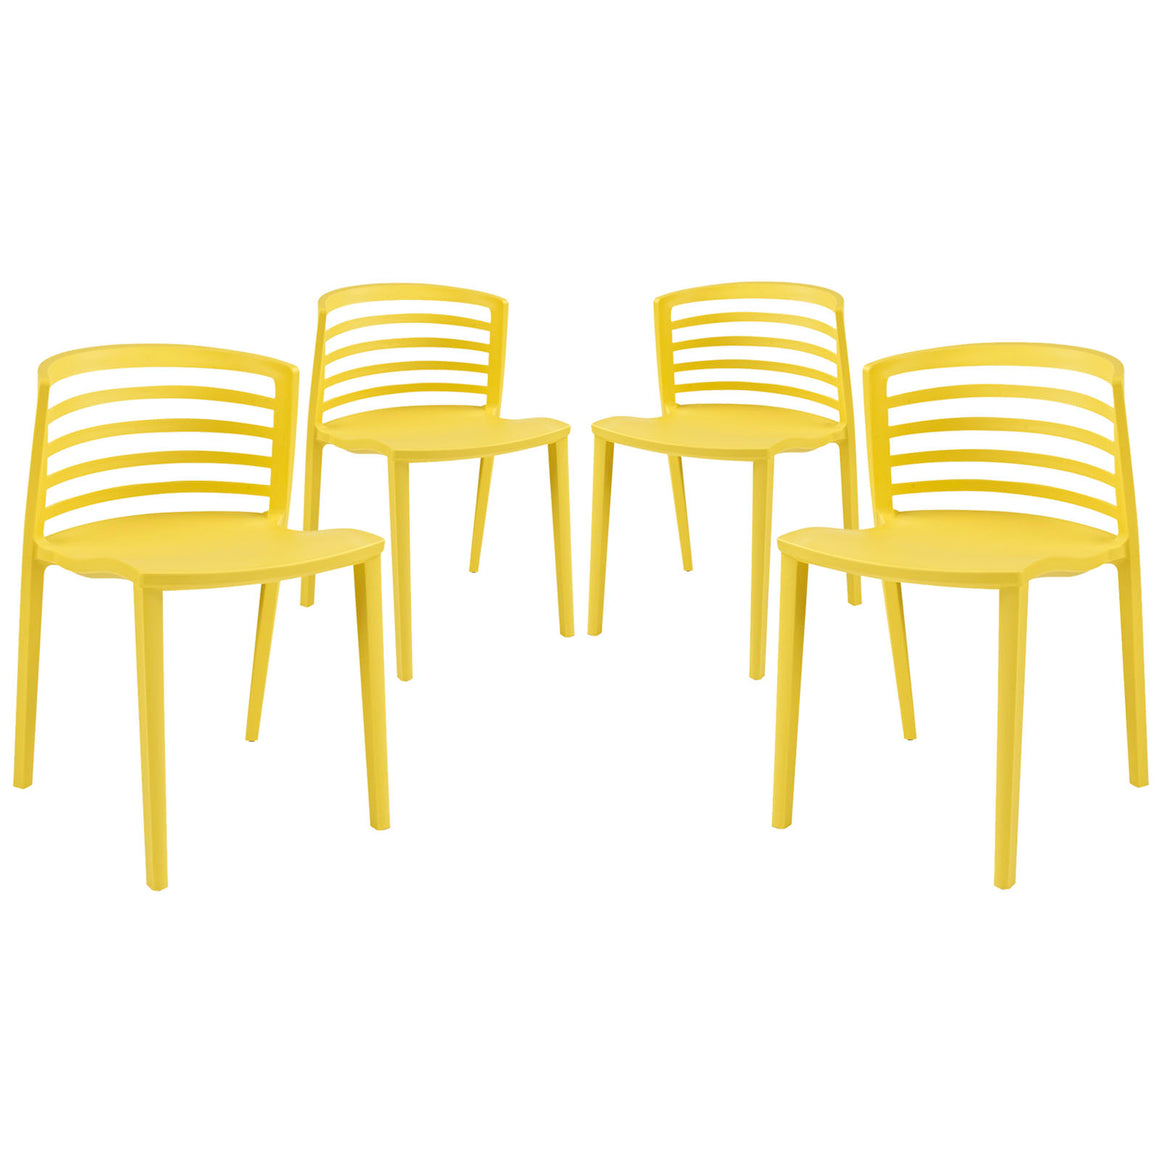 Curvy Dining Chairs Set of 4